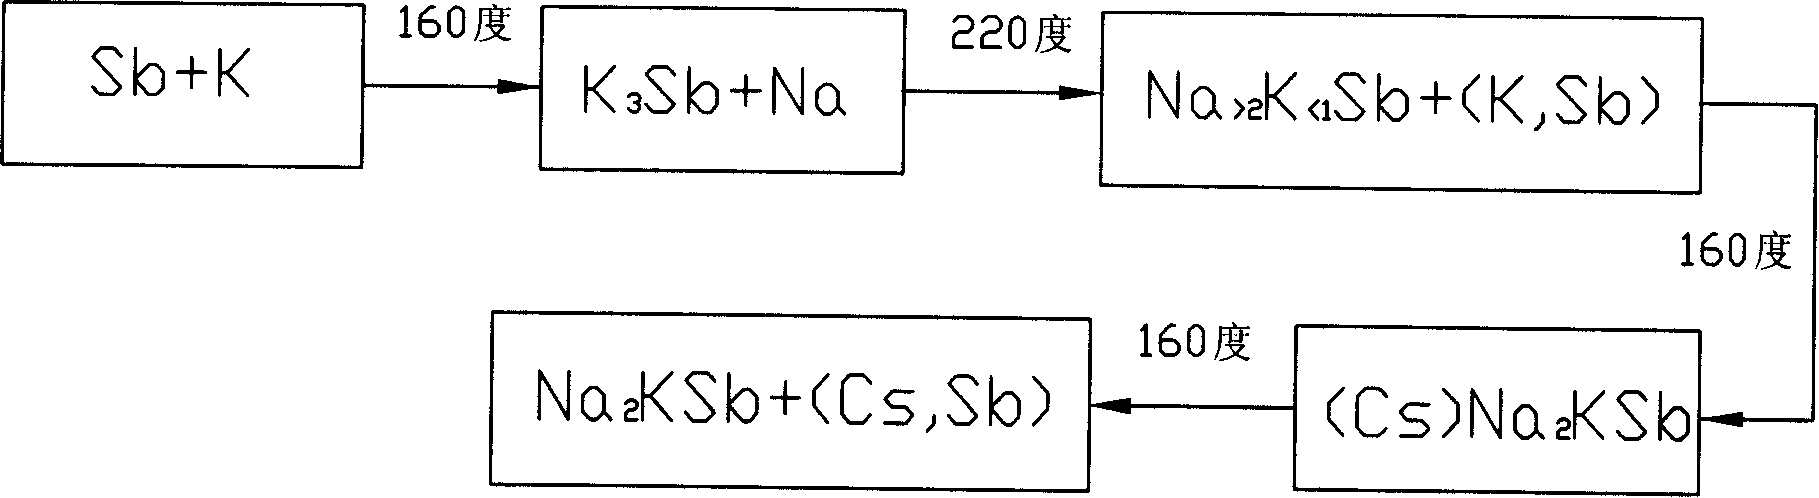 Field-assisted multiple alkalis photo-cathode